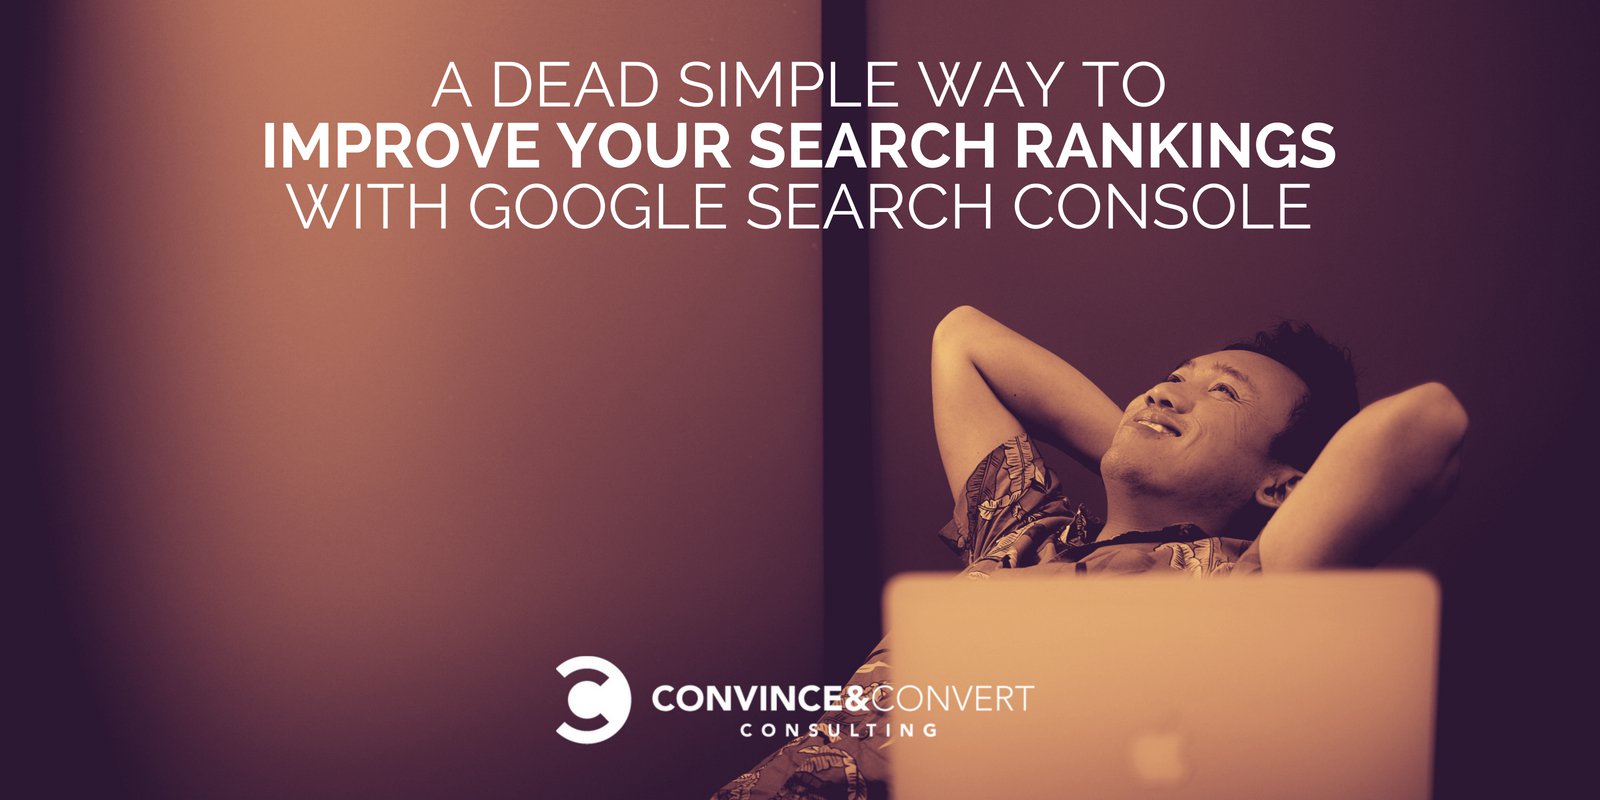 A Dead Simple Way to Improve Your Search Rankings with Google Search Console